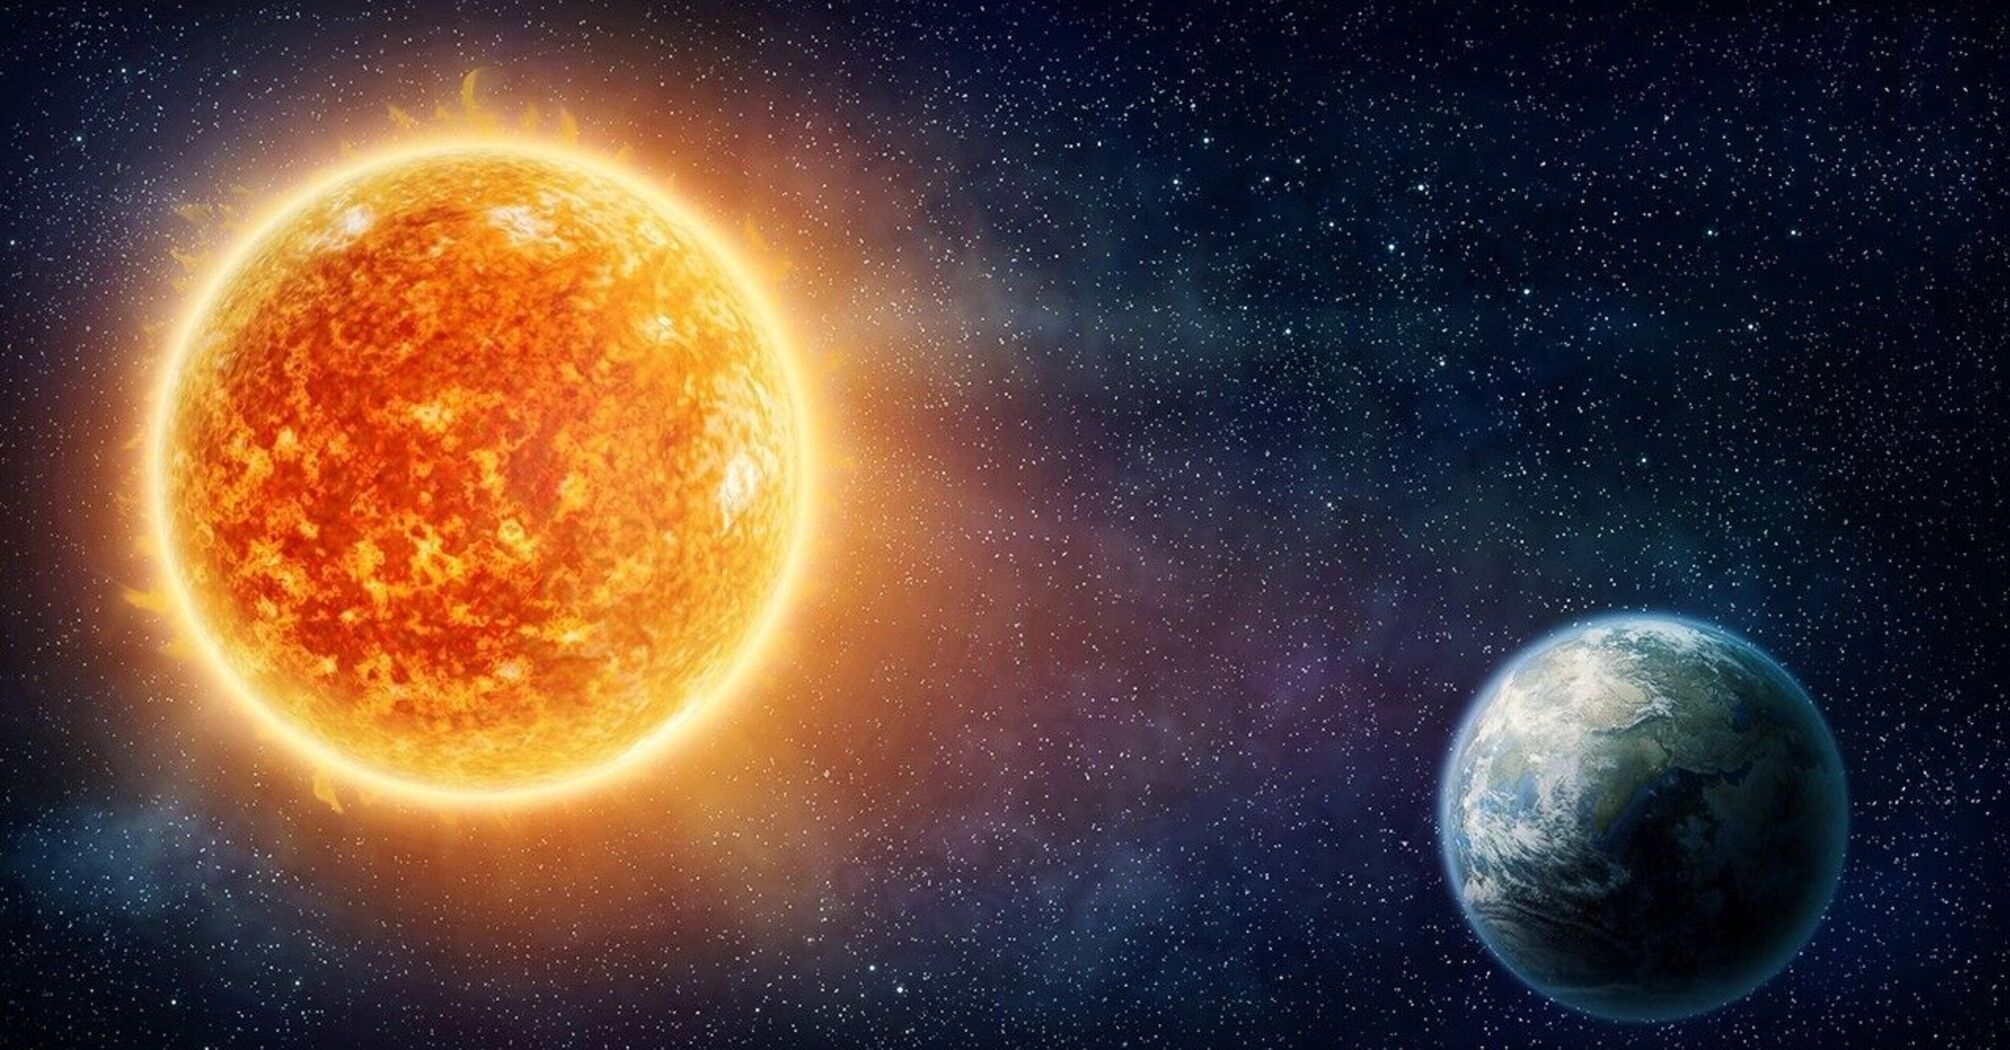 Scientists discover that the Sun may be much smaller than they previously thought